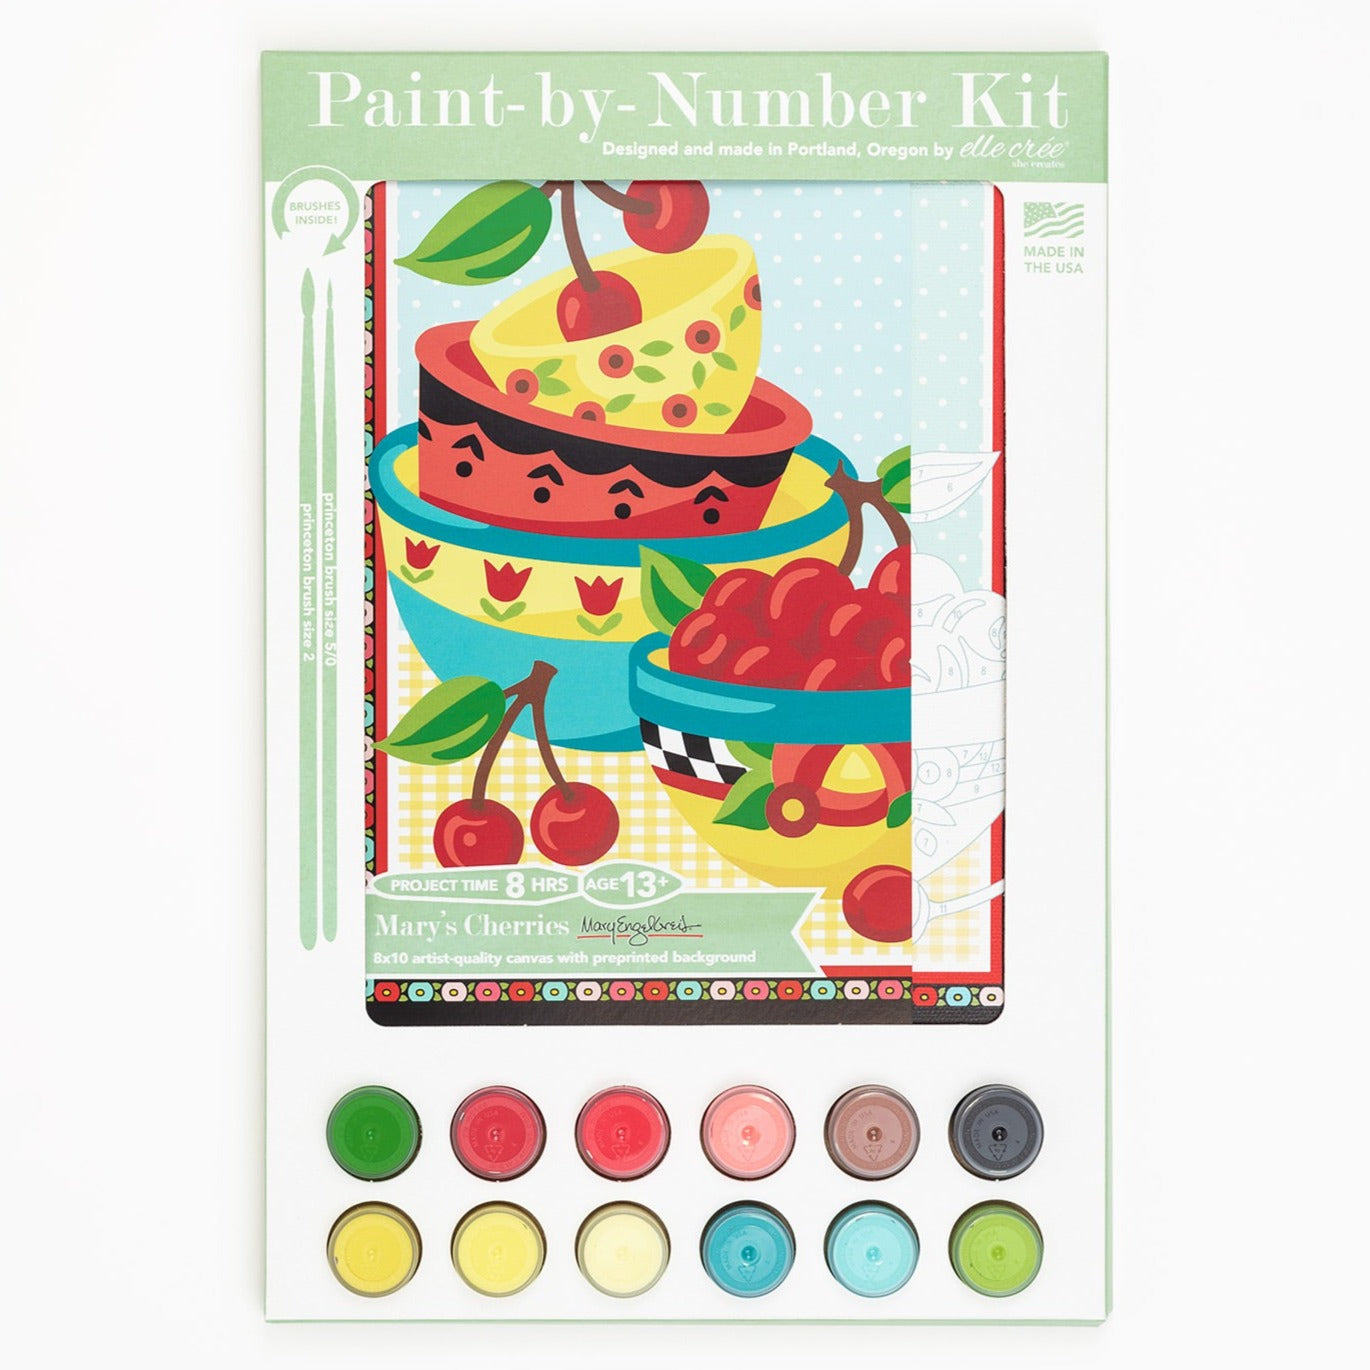 Breit Cottage Paint-by-Number Kit